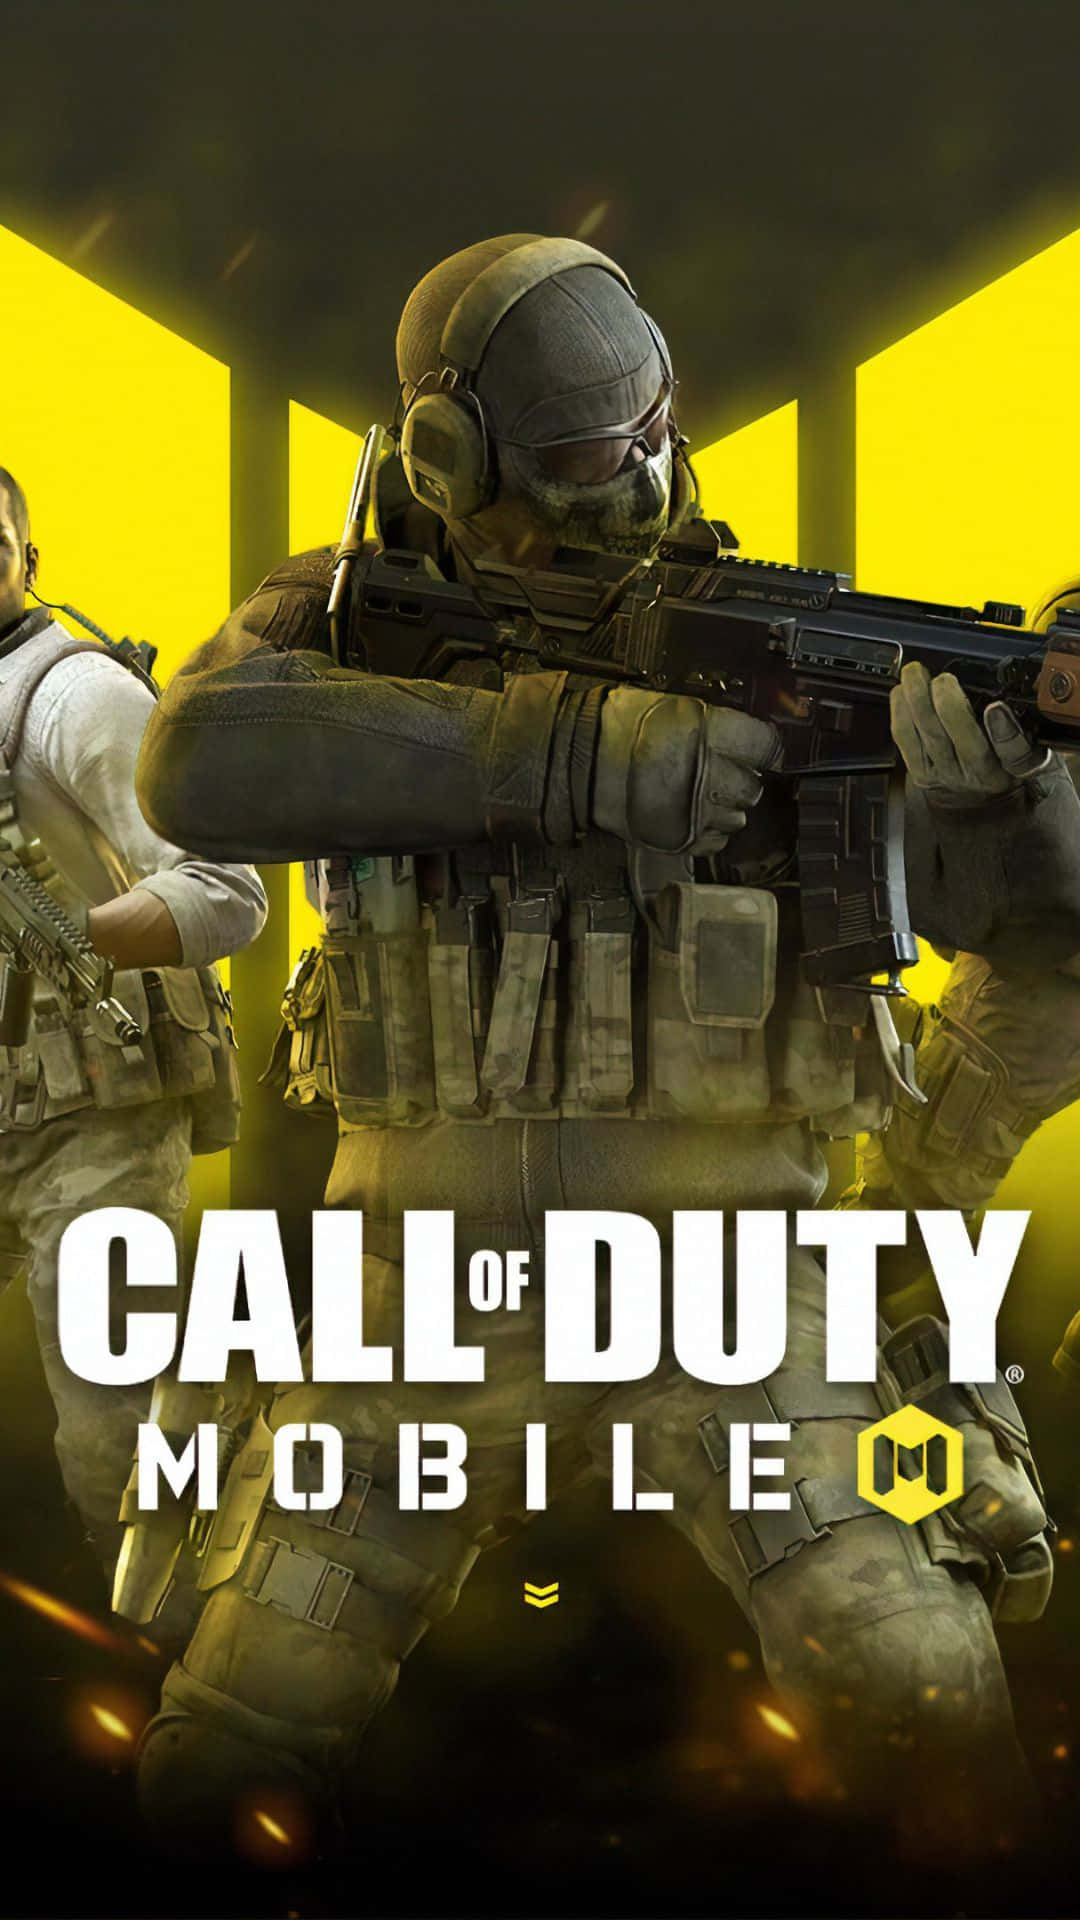 Experience the Ultimate Action in Call of Duty Mobile